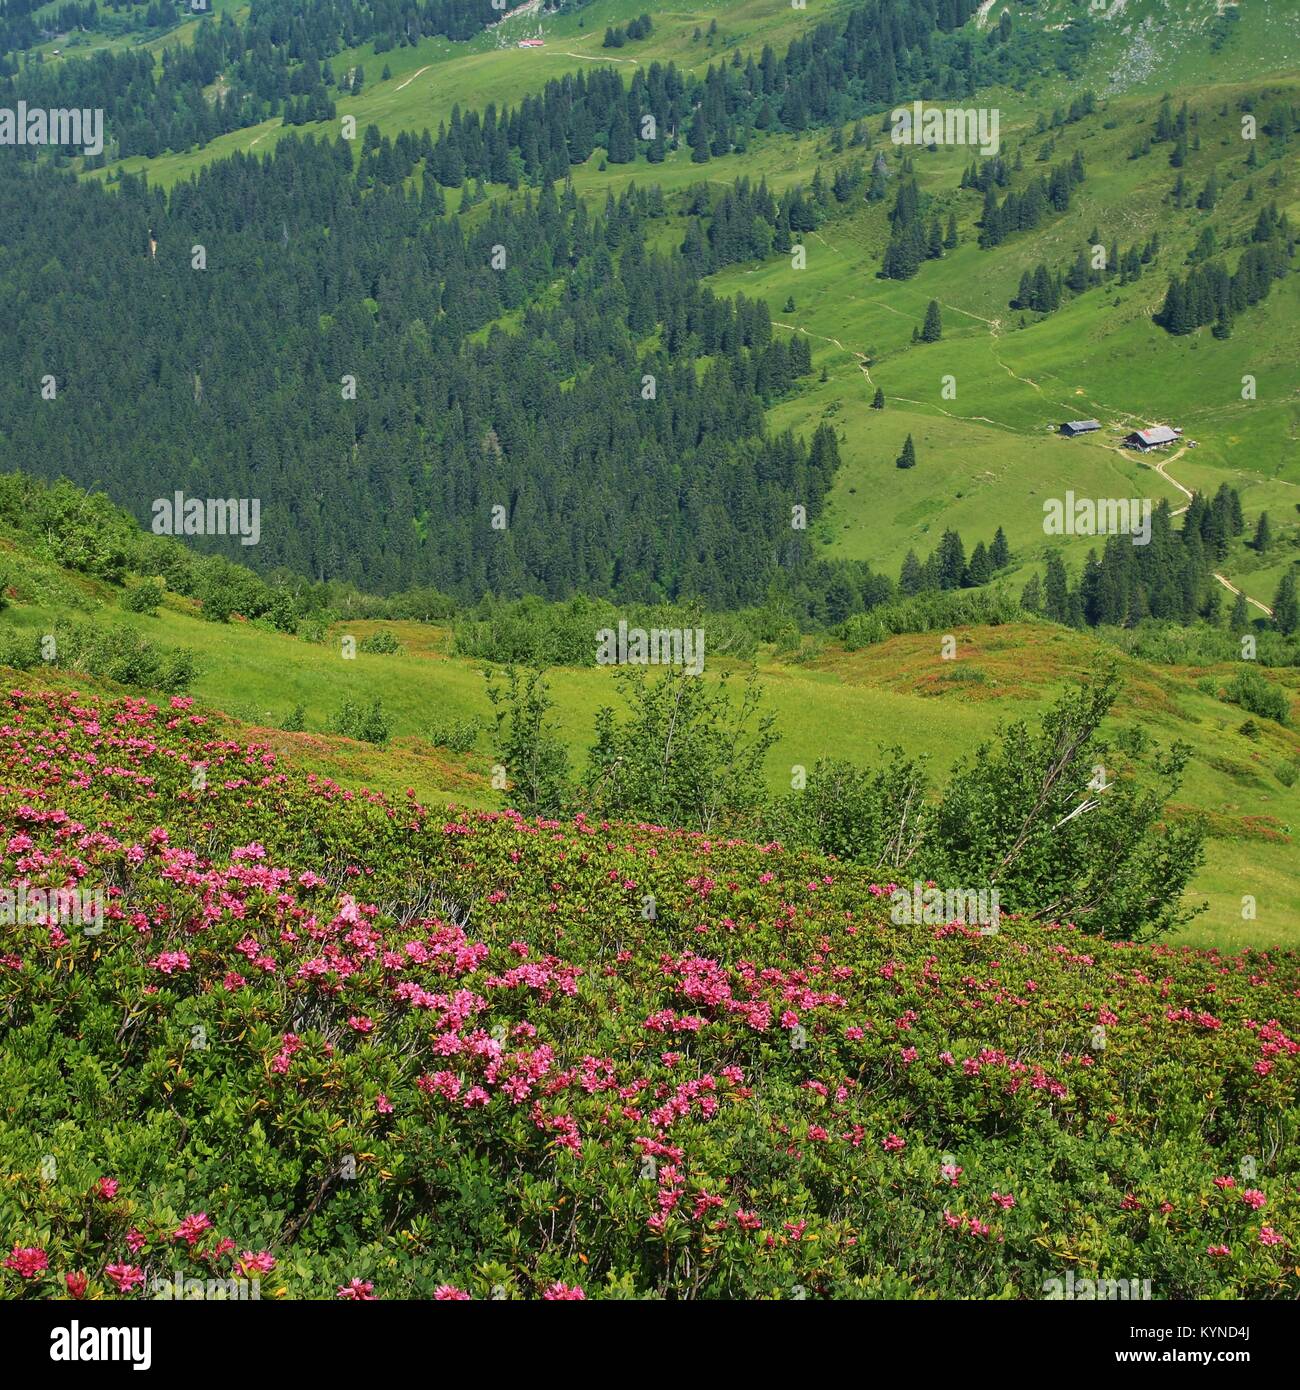 Alpenrosen green meadow and distant view of a farm. Summer scene near Gstaad. Stock Photo